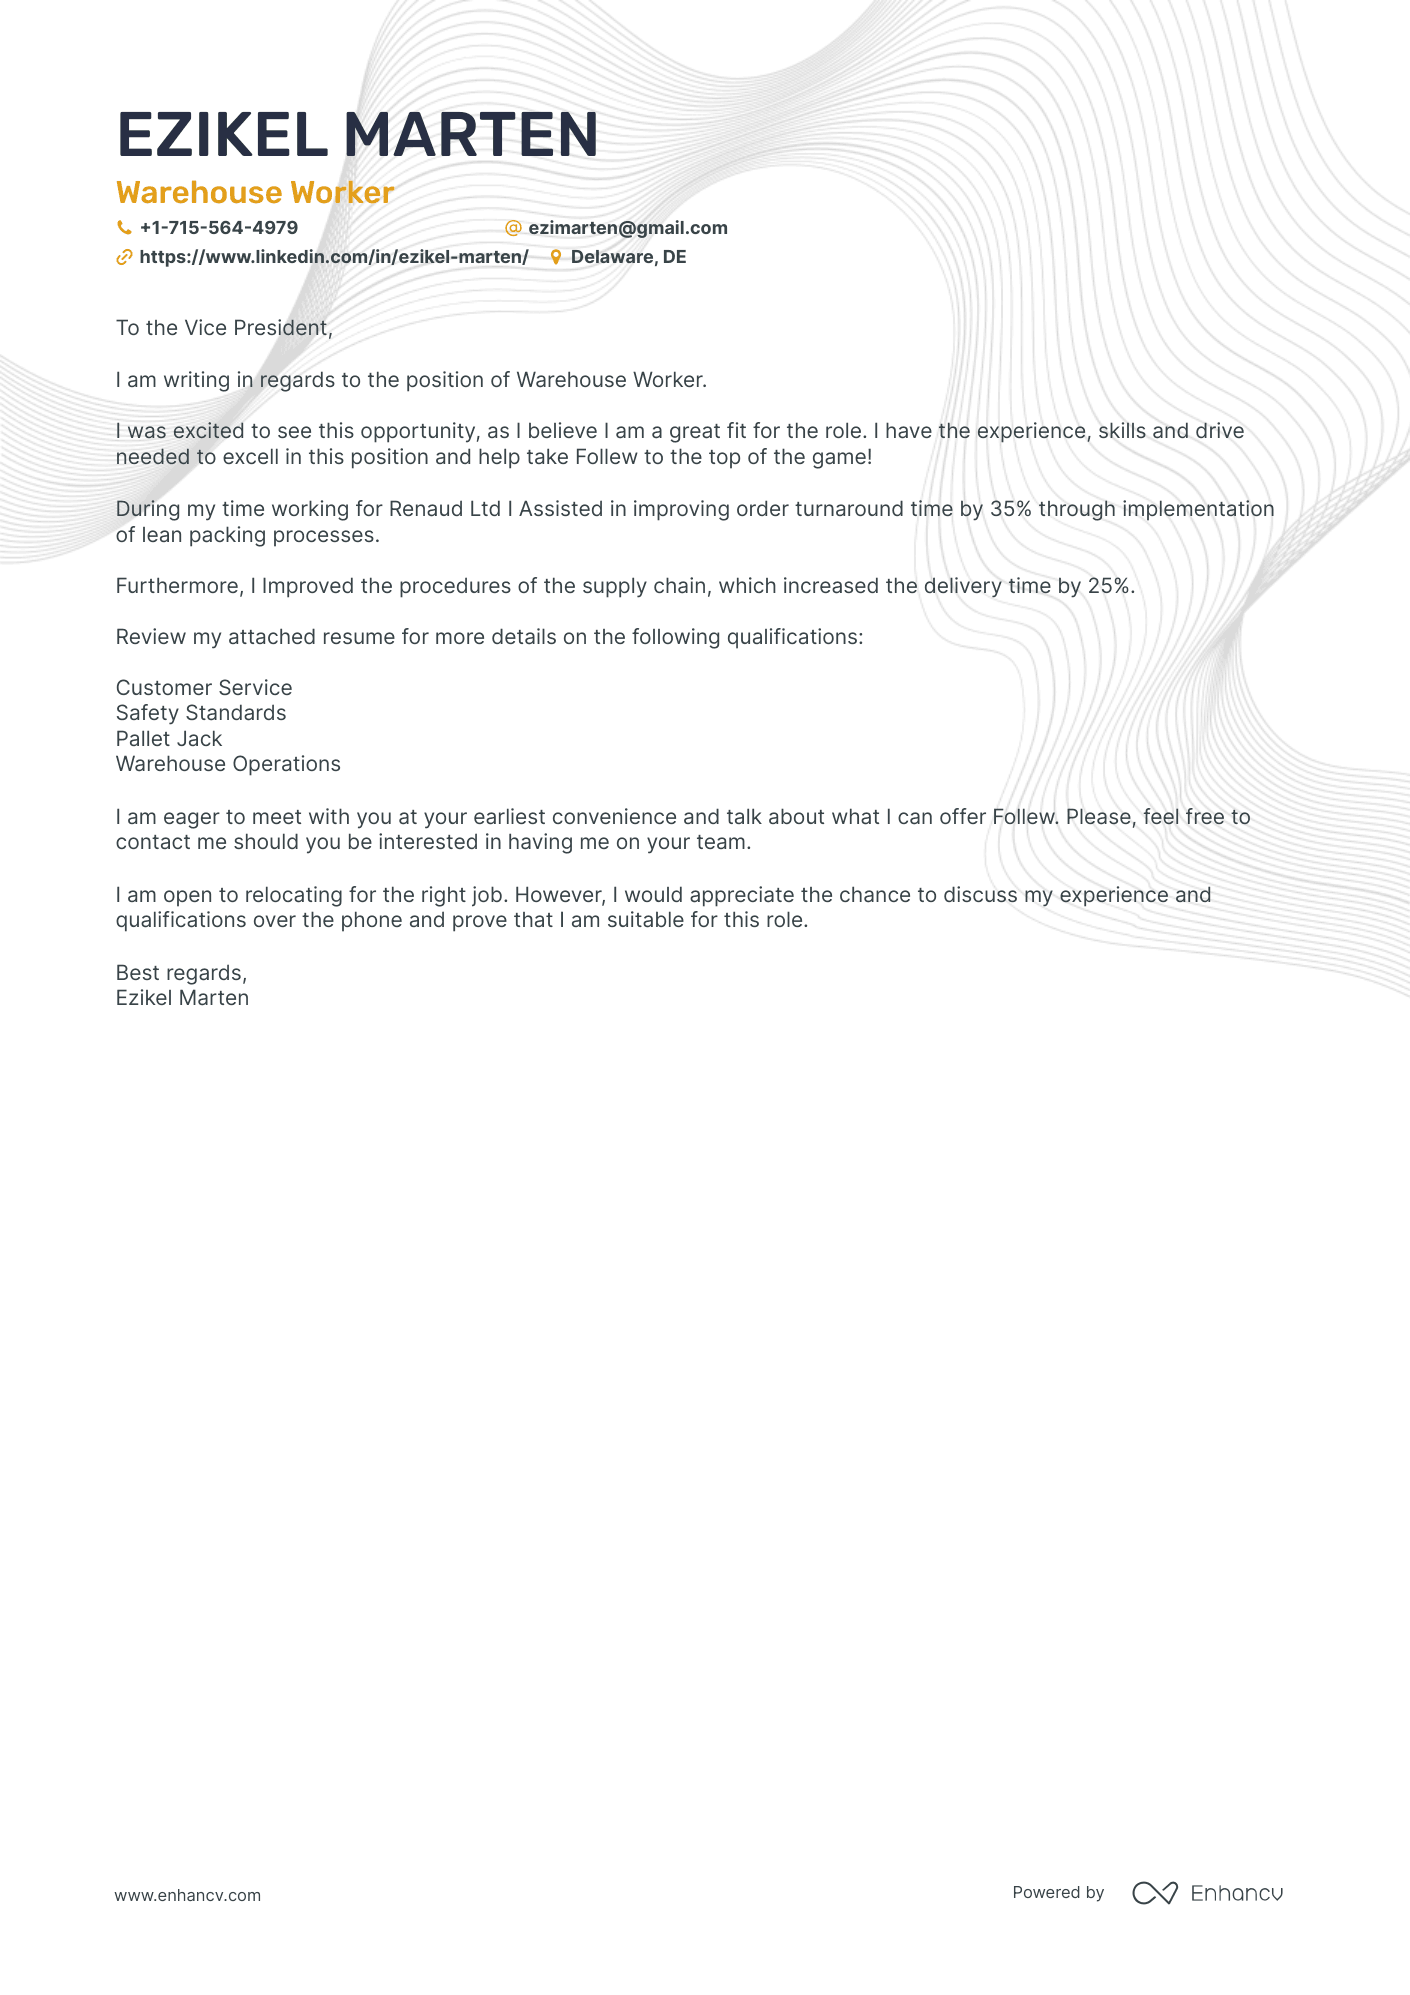 Warehouse Worker cover letter